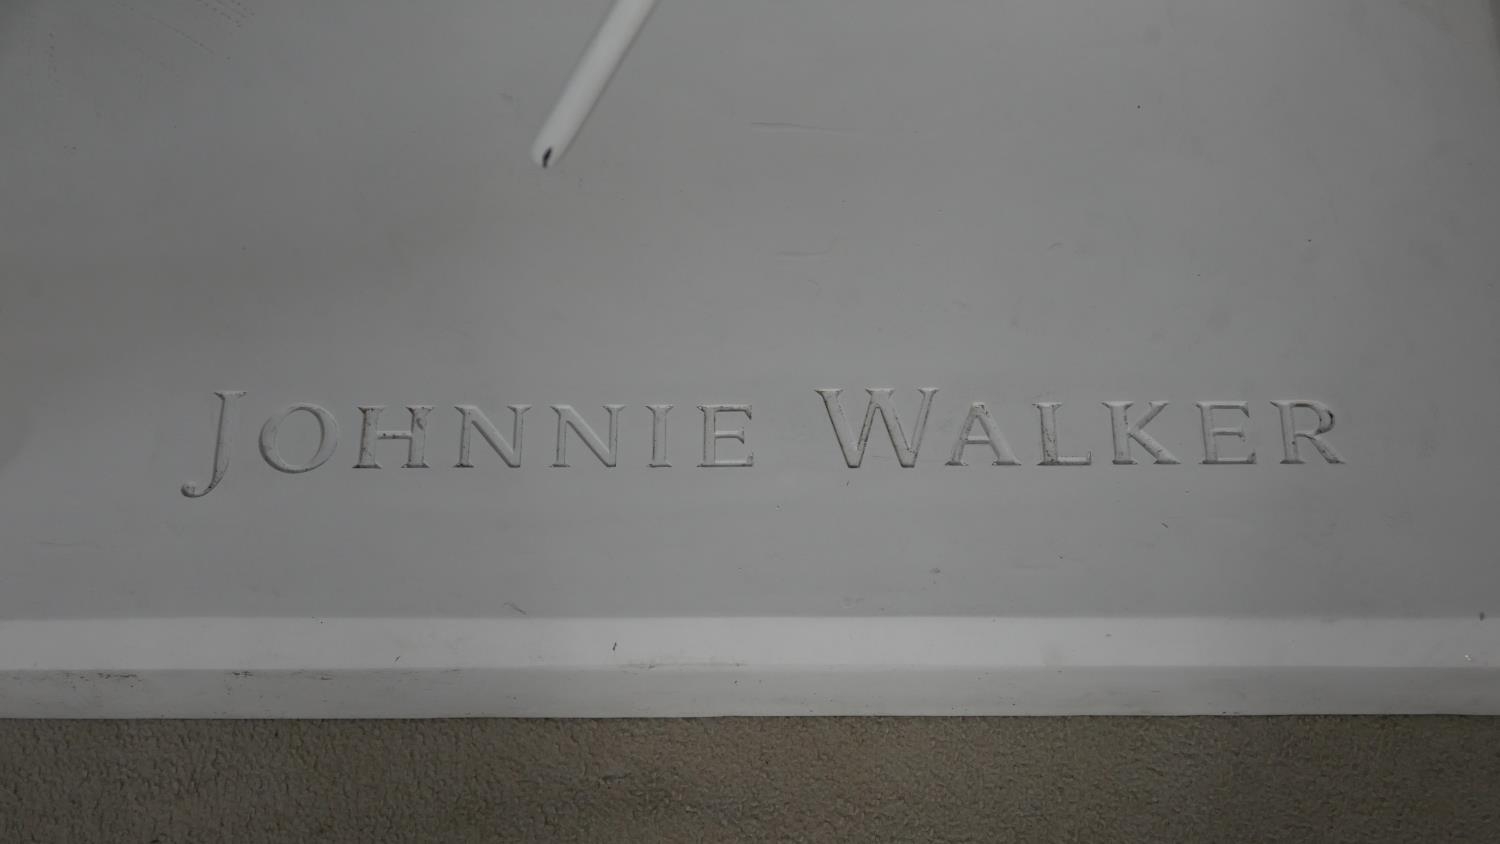 A life size white fibreglass figure of Johnnie Walker on a rectangular base, stamped Johnnie Walker. - Image 2 of 5